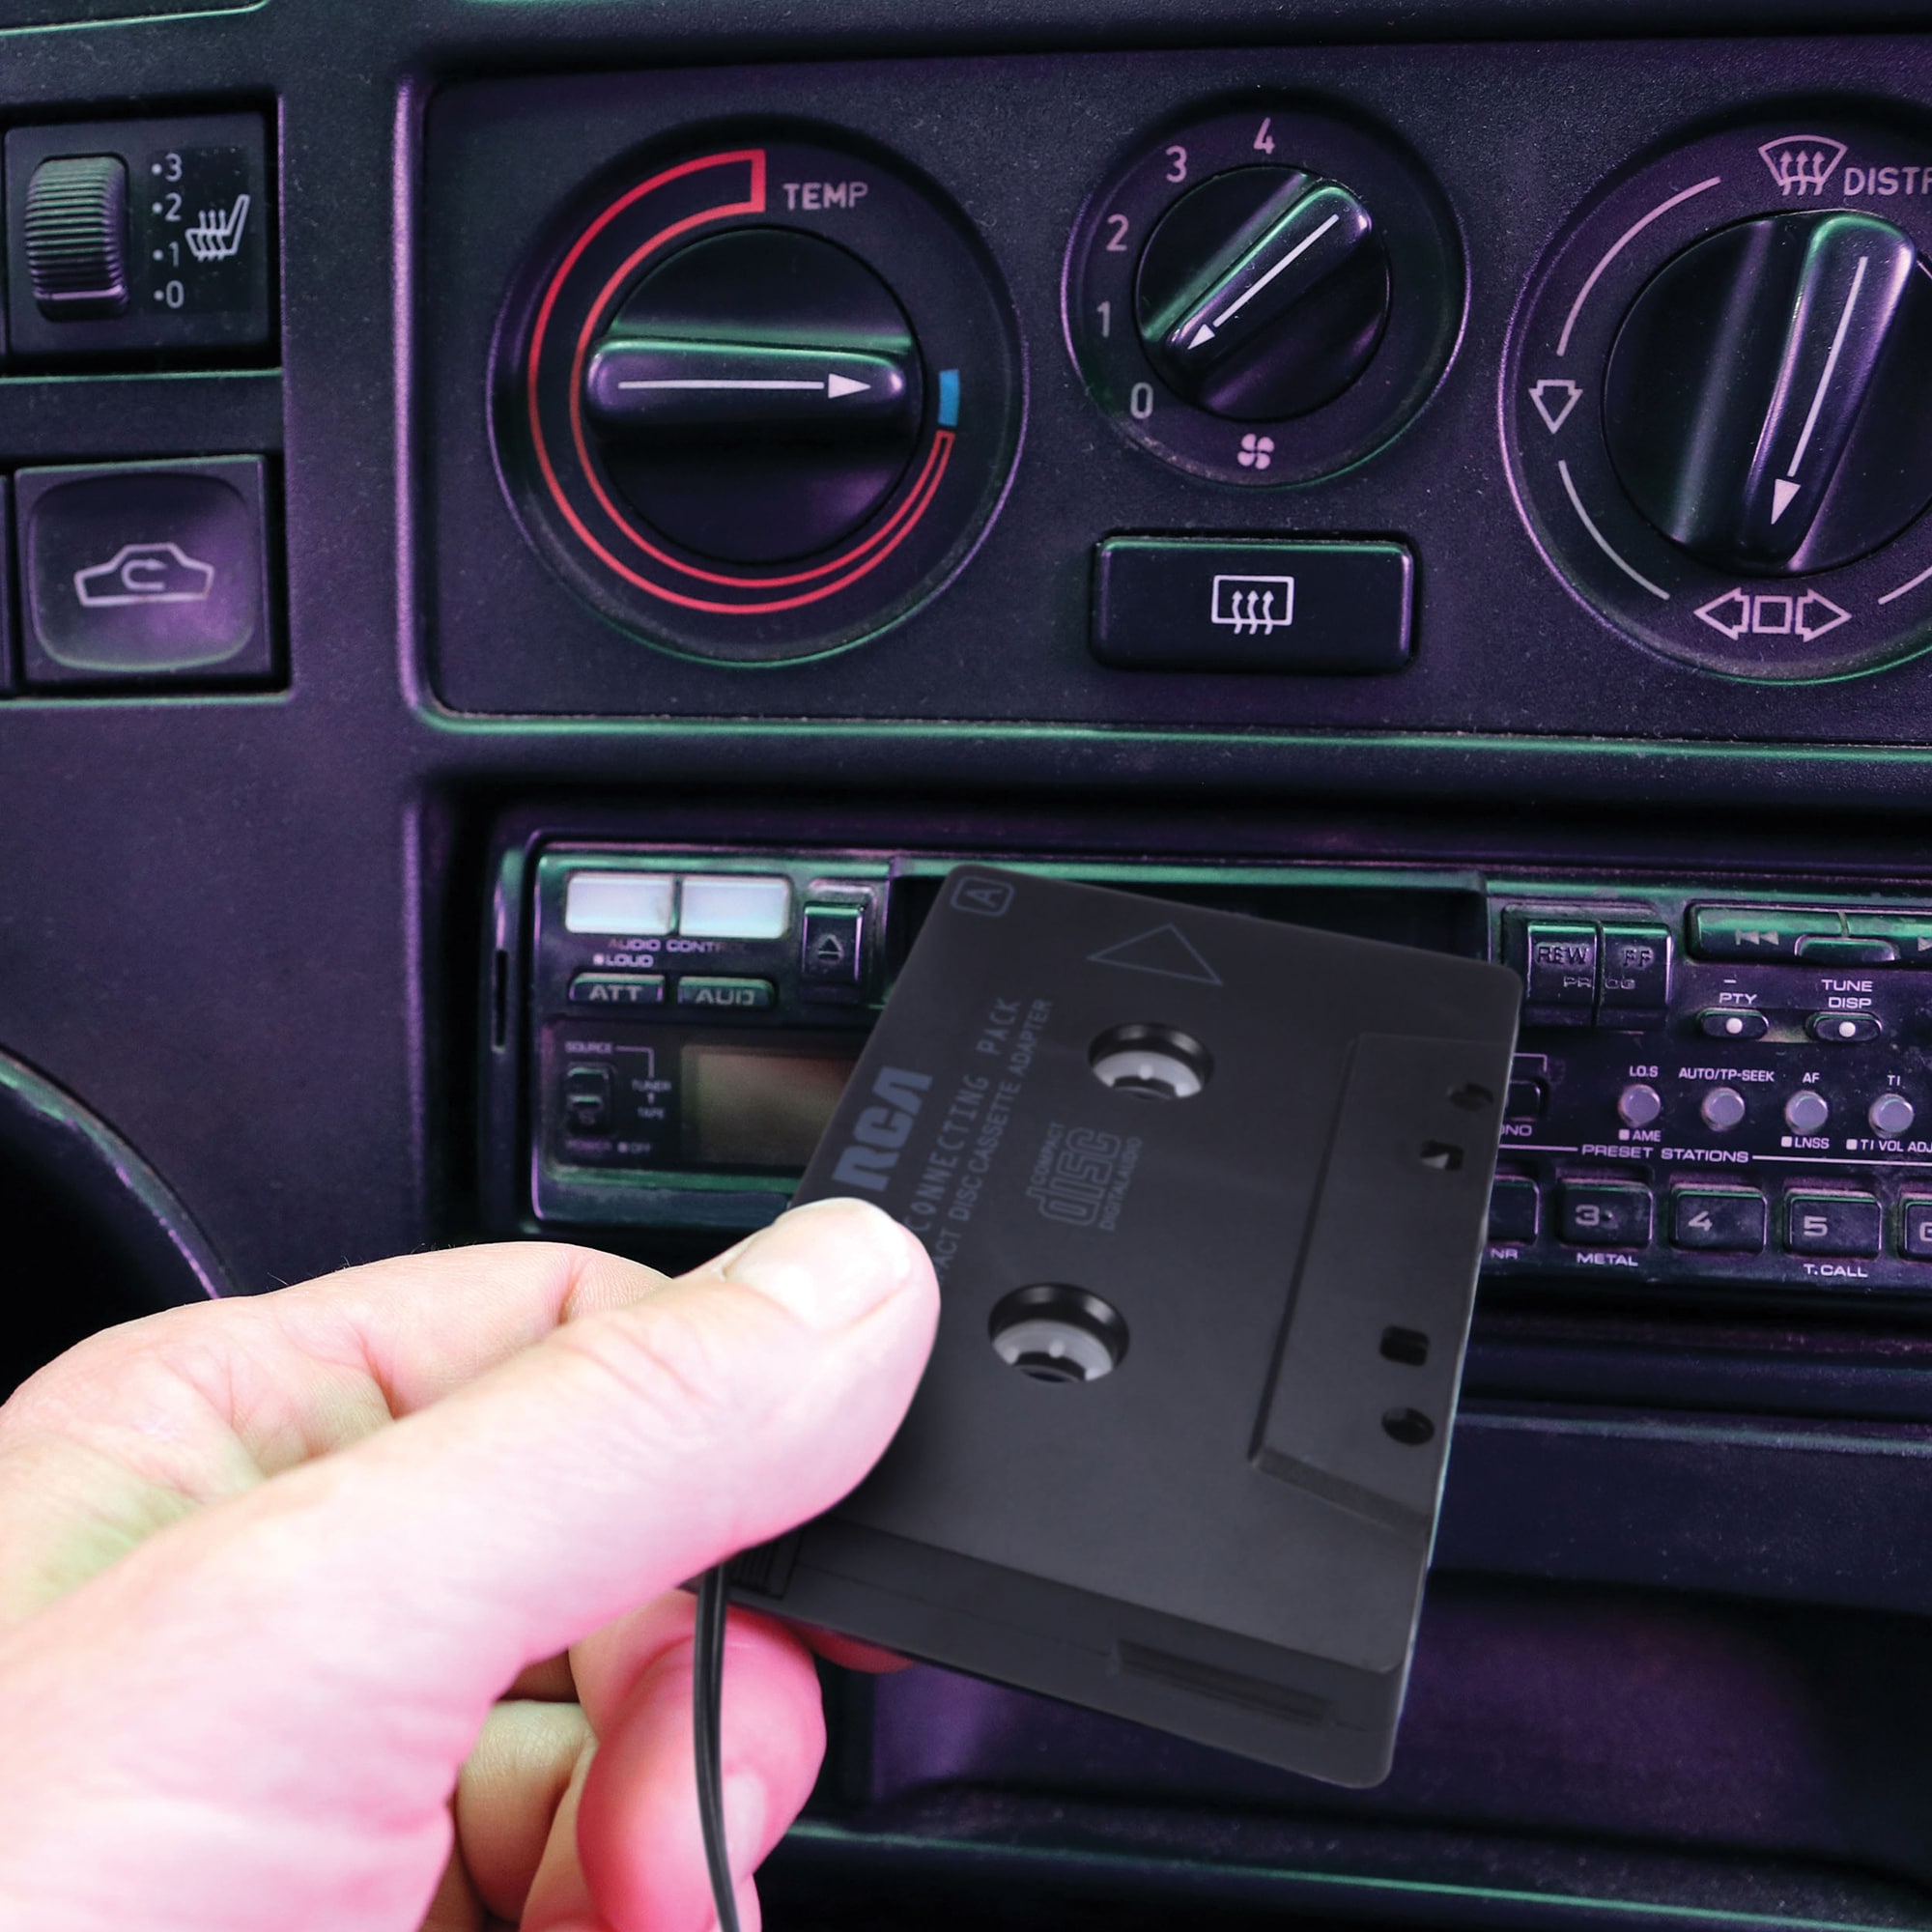 RCA CD/Auto Cassette Adapter - Connects Portable Players to Car Cassette  Deck - Compatible with 30.5mm Headphone Output in the Mobile Audio  department at